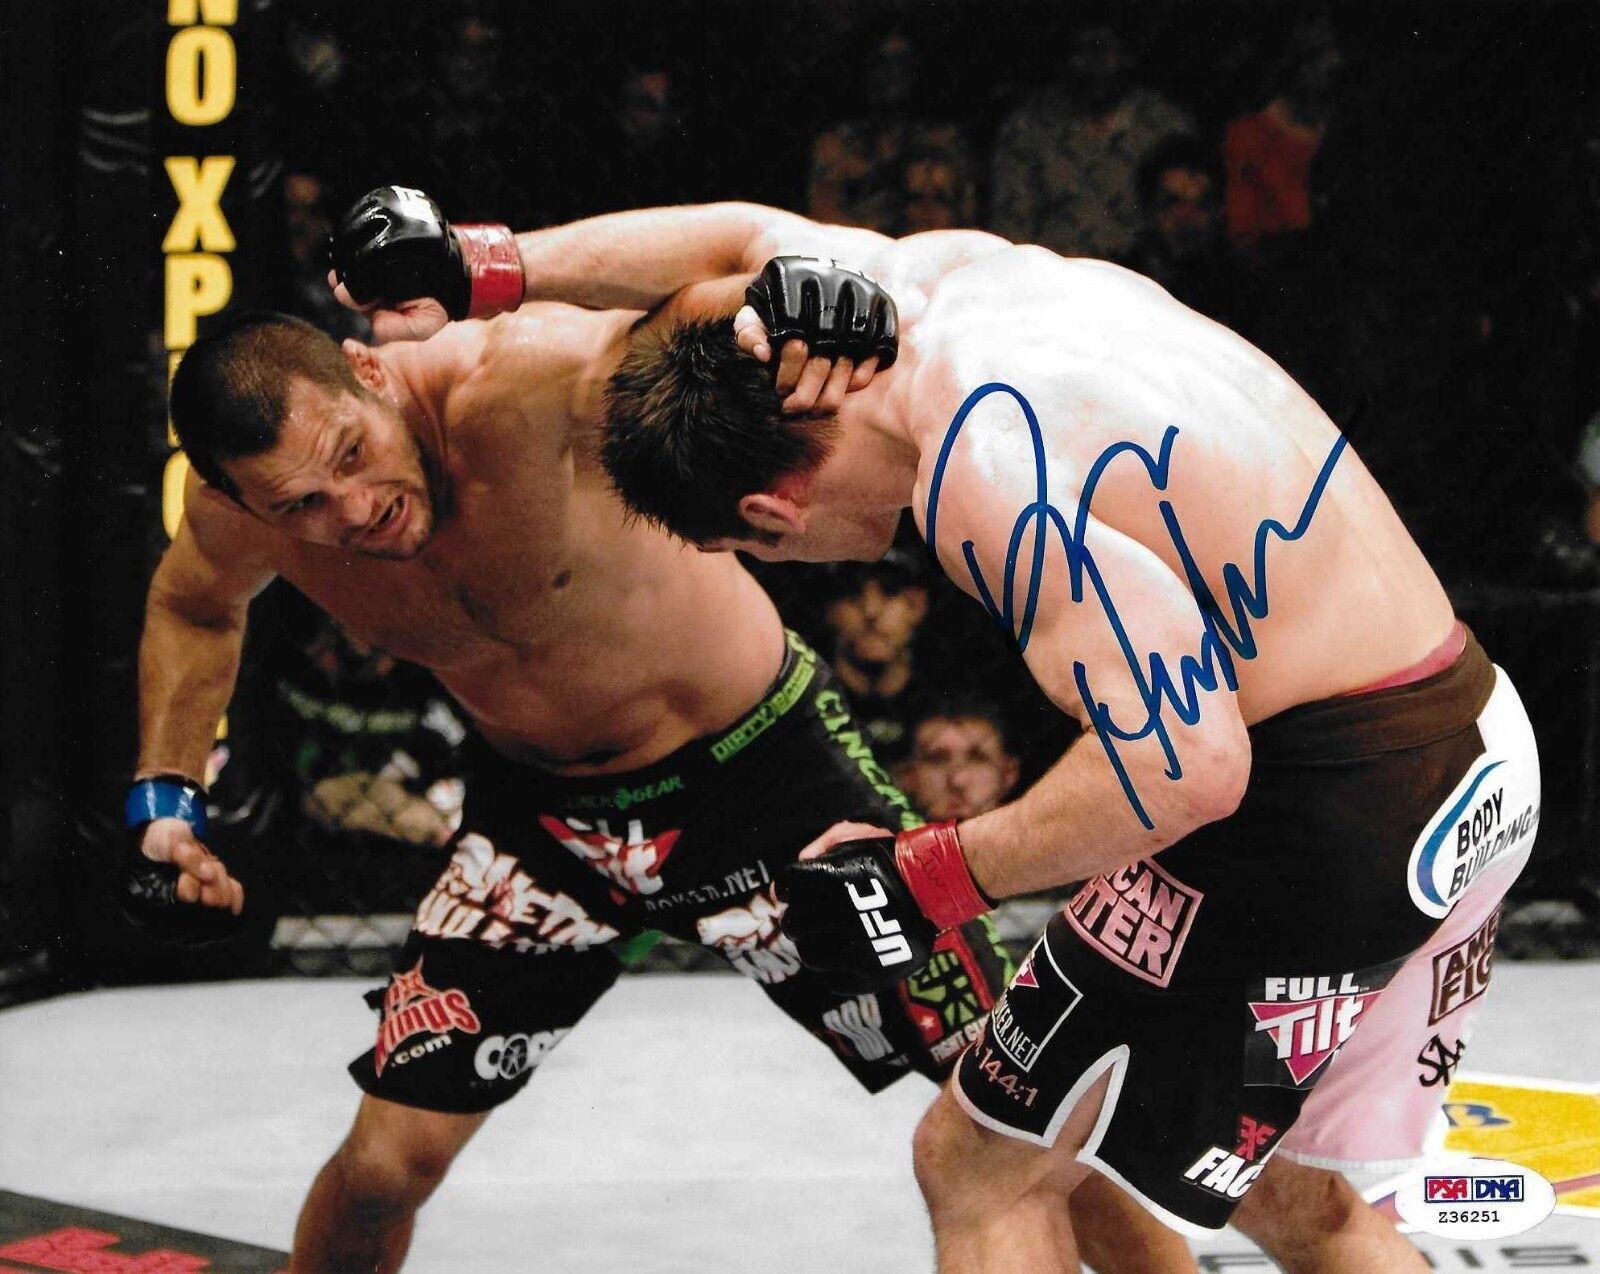 Dan Henderson Signed UFC 8x10 Photo Poster painting PSA/DNA COA Auto Picture 93 v Rich Franklin